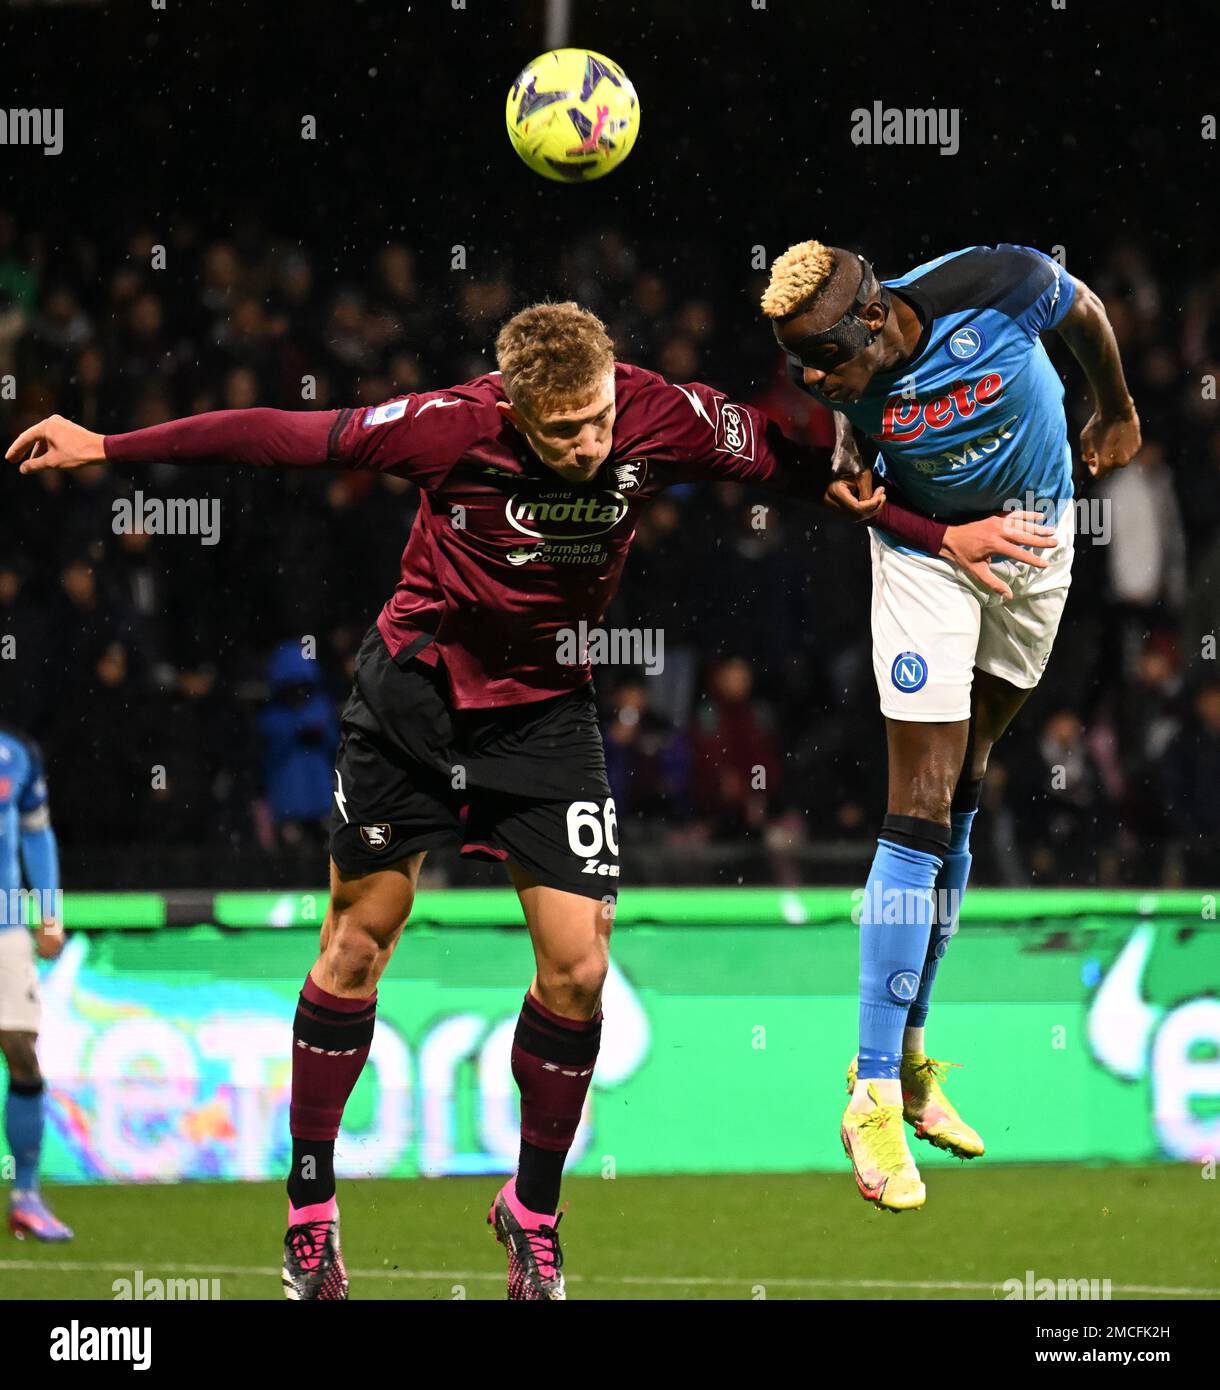 Salerno, Italy. 21st Jan, 2023. Napoli's Victor Osimhen (R) vies with Salernitana's Matteo Lovato during a Serie A football match in Salerno, Italy, Jan. 21, 2023. Credit: Alberto Lingria/Xinhua/Alamy Live News Stock Photo